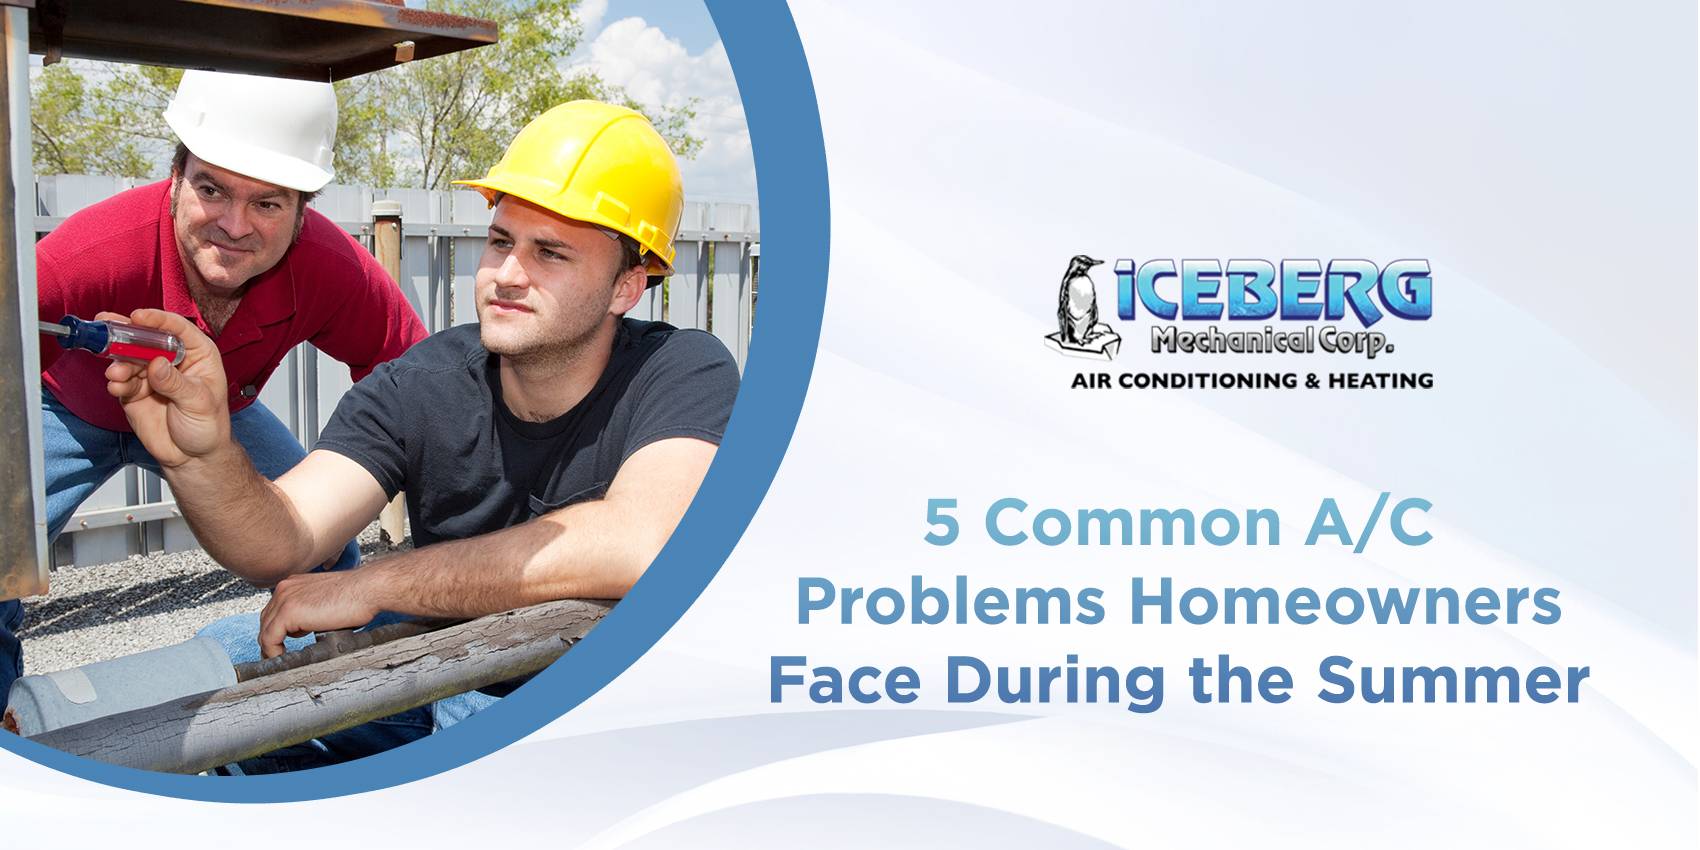 5 Common A/C Problems Homeowners Face During the Summer